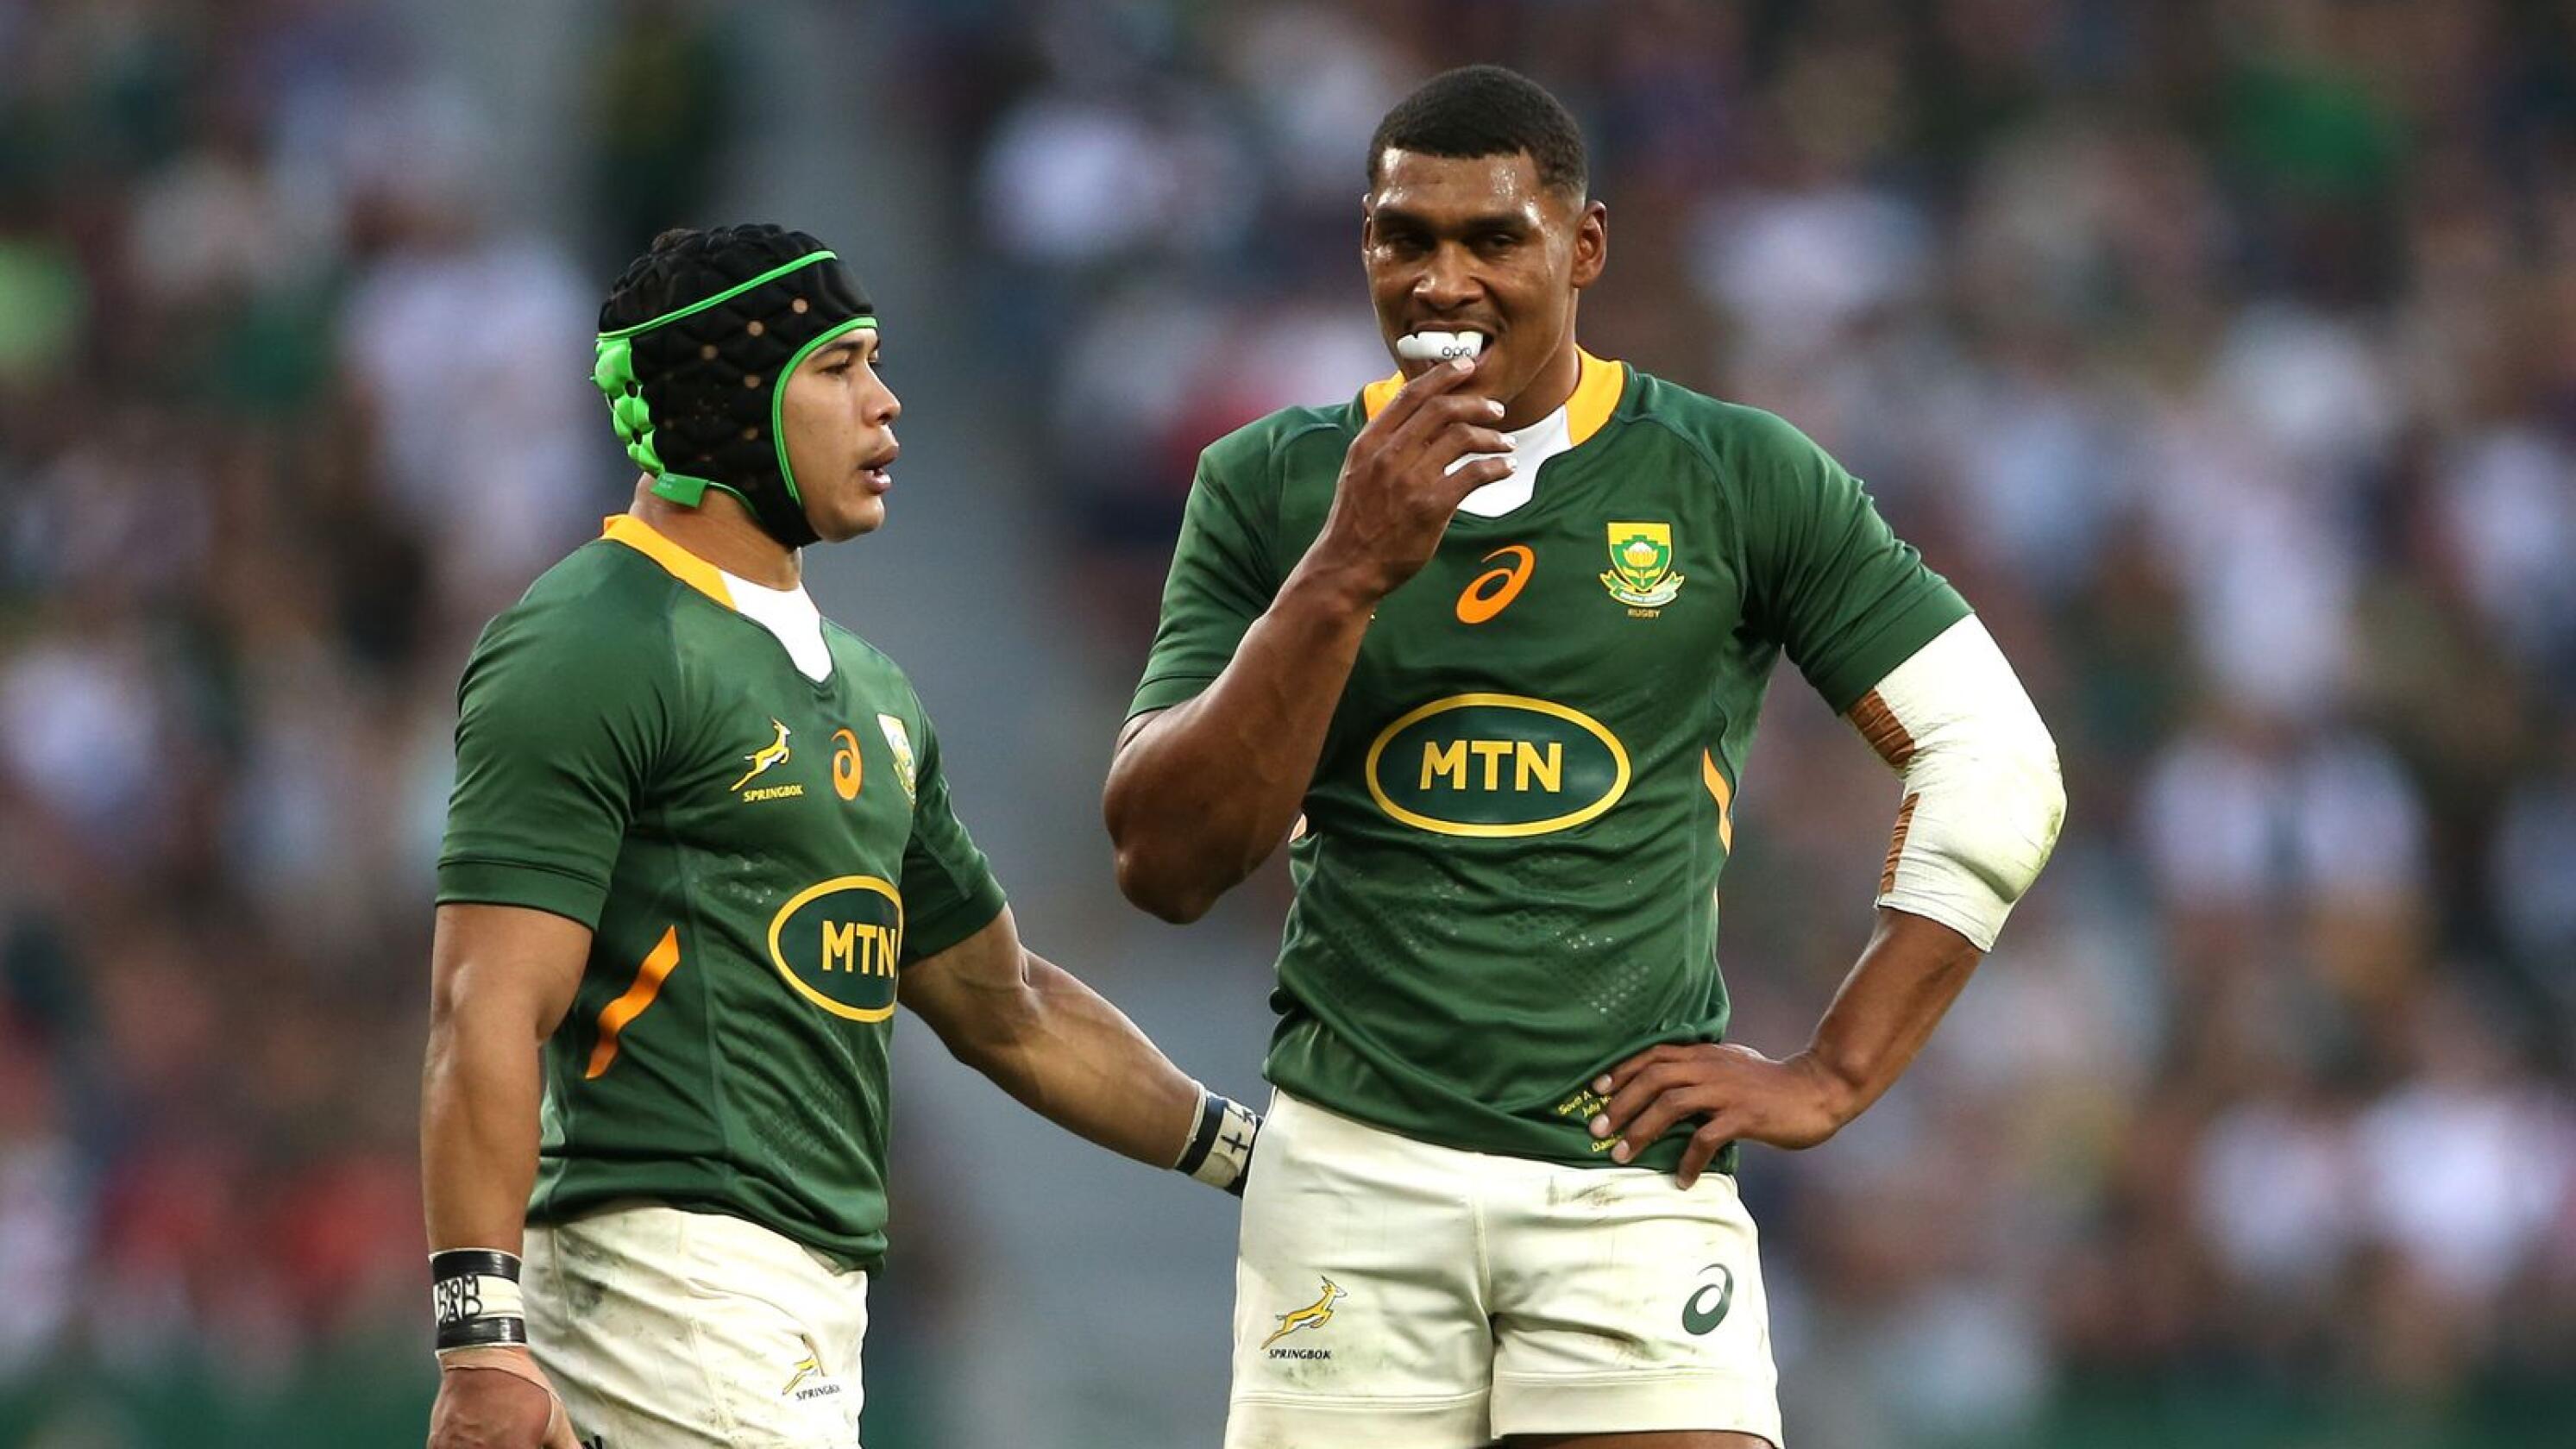 Cheslin Kolbe of South Africa and Damian Willemse of South Africa during the 2022 Castle Lager Incoming Series match between South Africa and Wales held at Cape Town Stadium in Cape Town, South Africa on 16 July